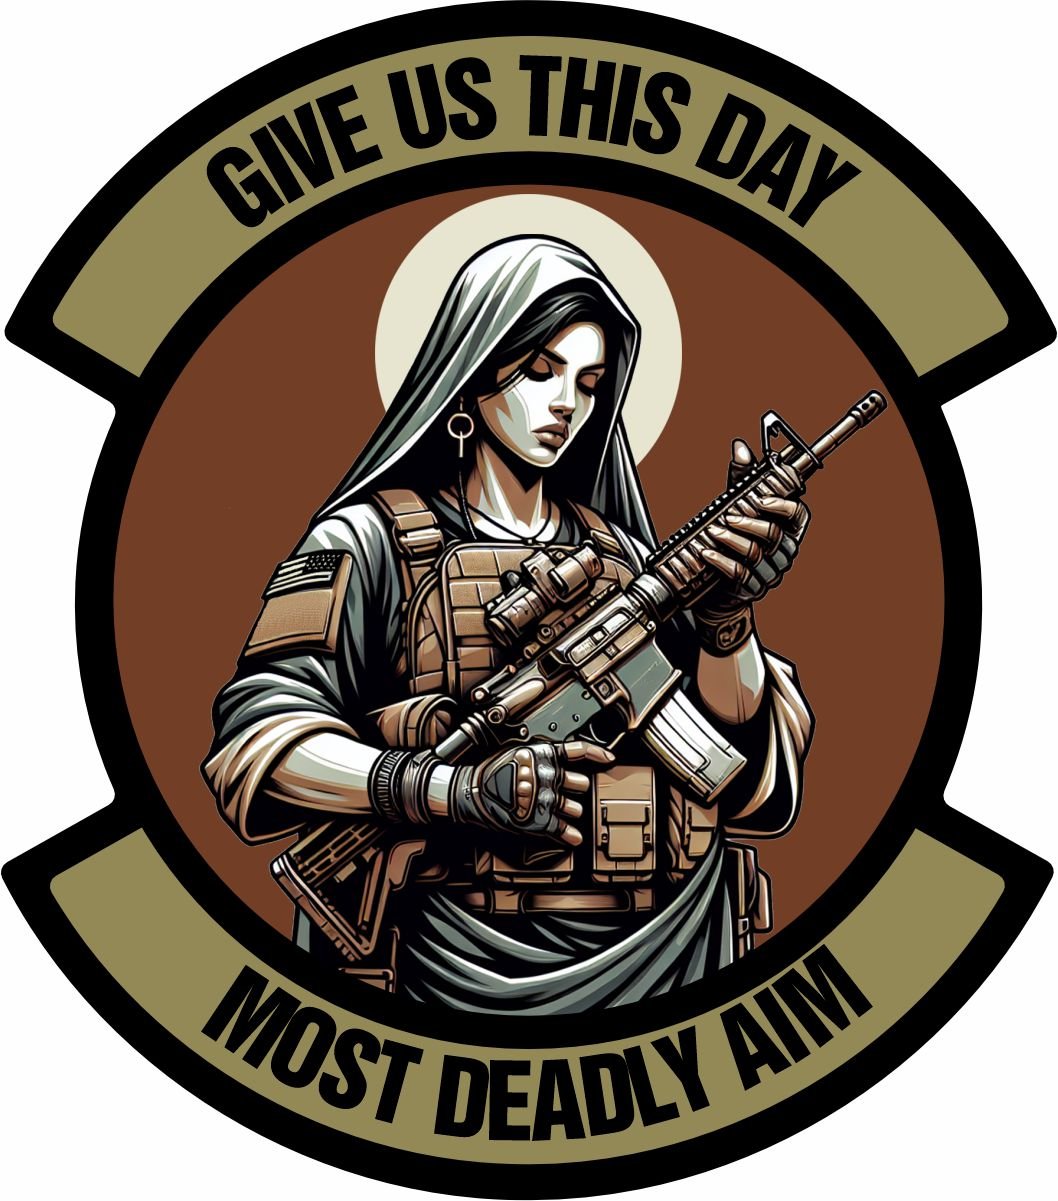 STICKER - May 2024 POTM - 'Mother Mary' - OCP Tactical Angel "Give Us This Day - Most Deadly Aim" 4" Sticker